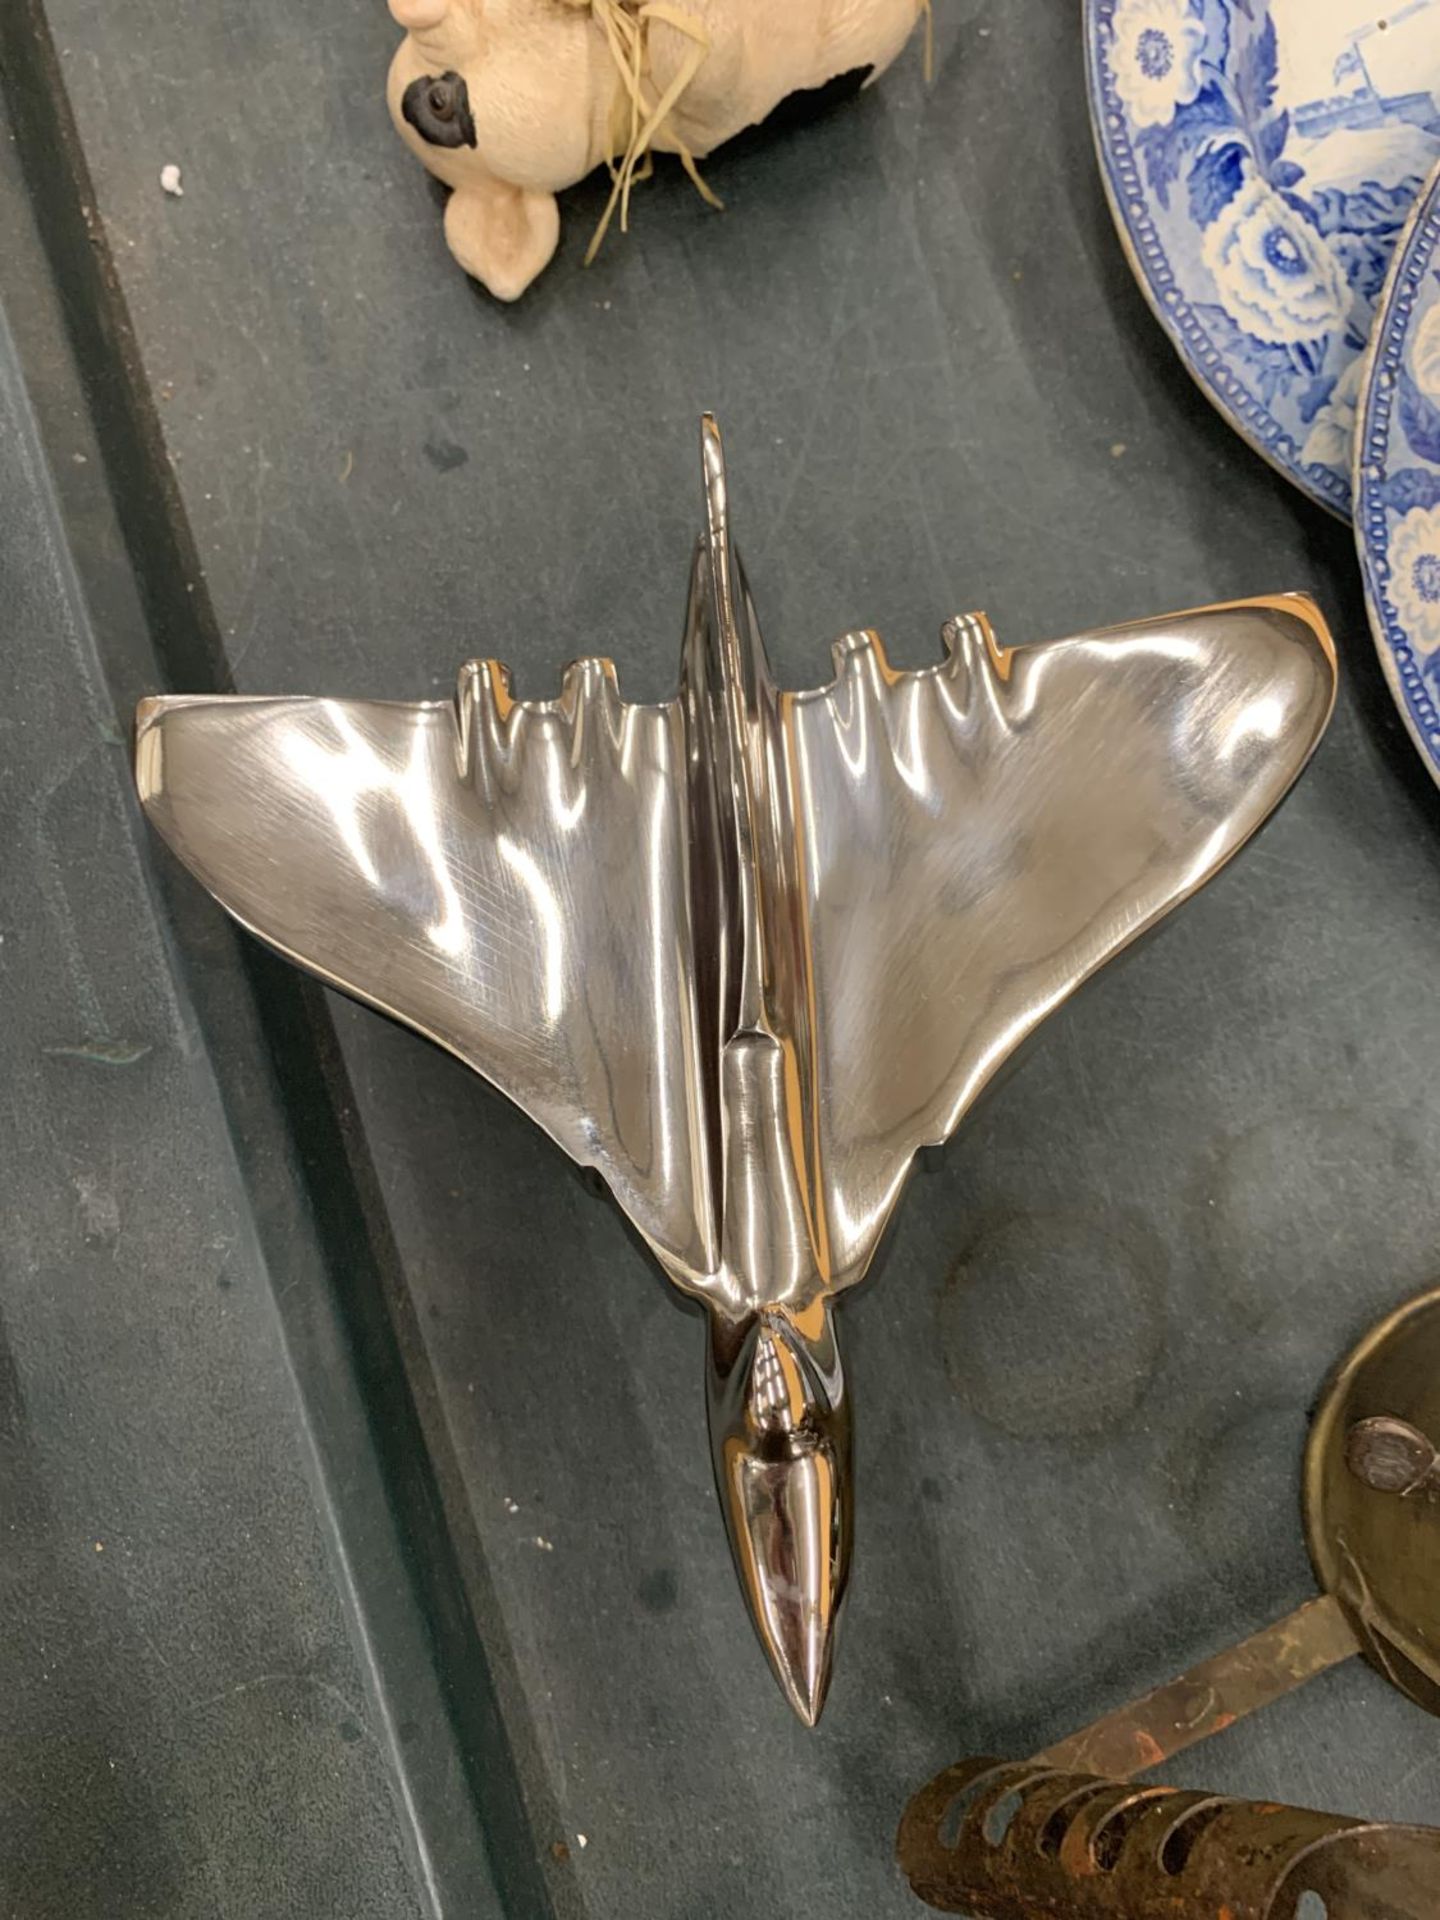 A CHROME VULCAN BOMBER ON A PLINTH, HEIGHT 13CM - Image 2 of 3